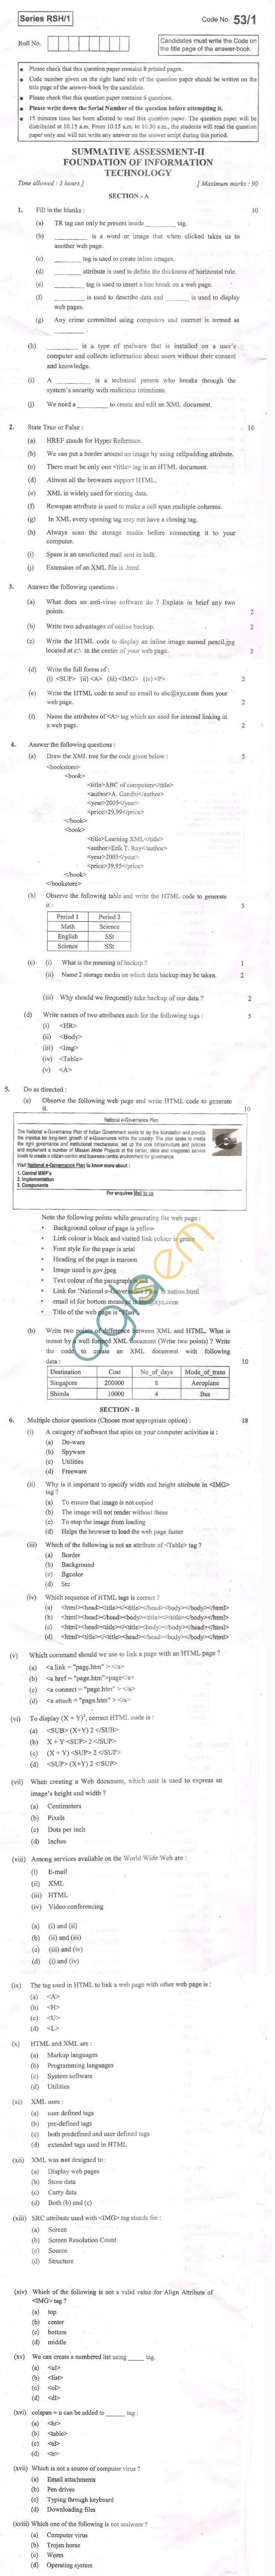 CBSE Board Exam 2013 Class X Question Paper - Foundation of Information Tecnology